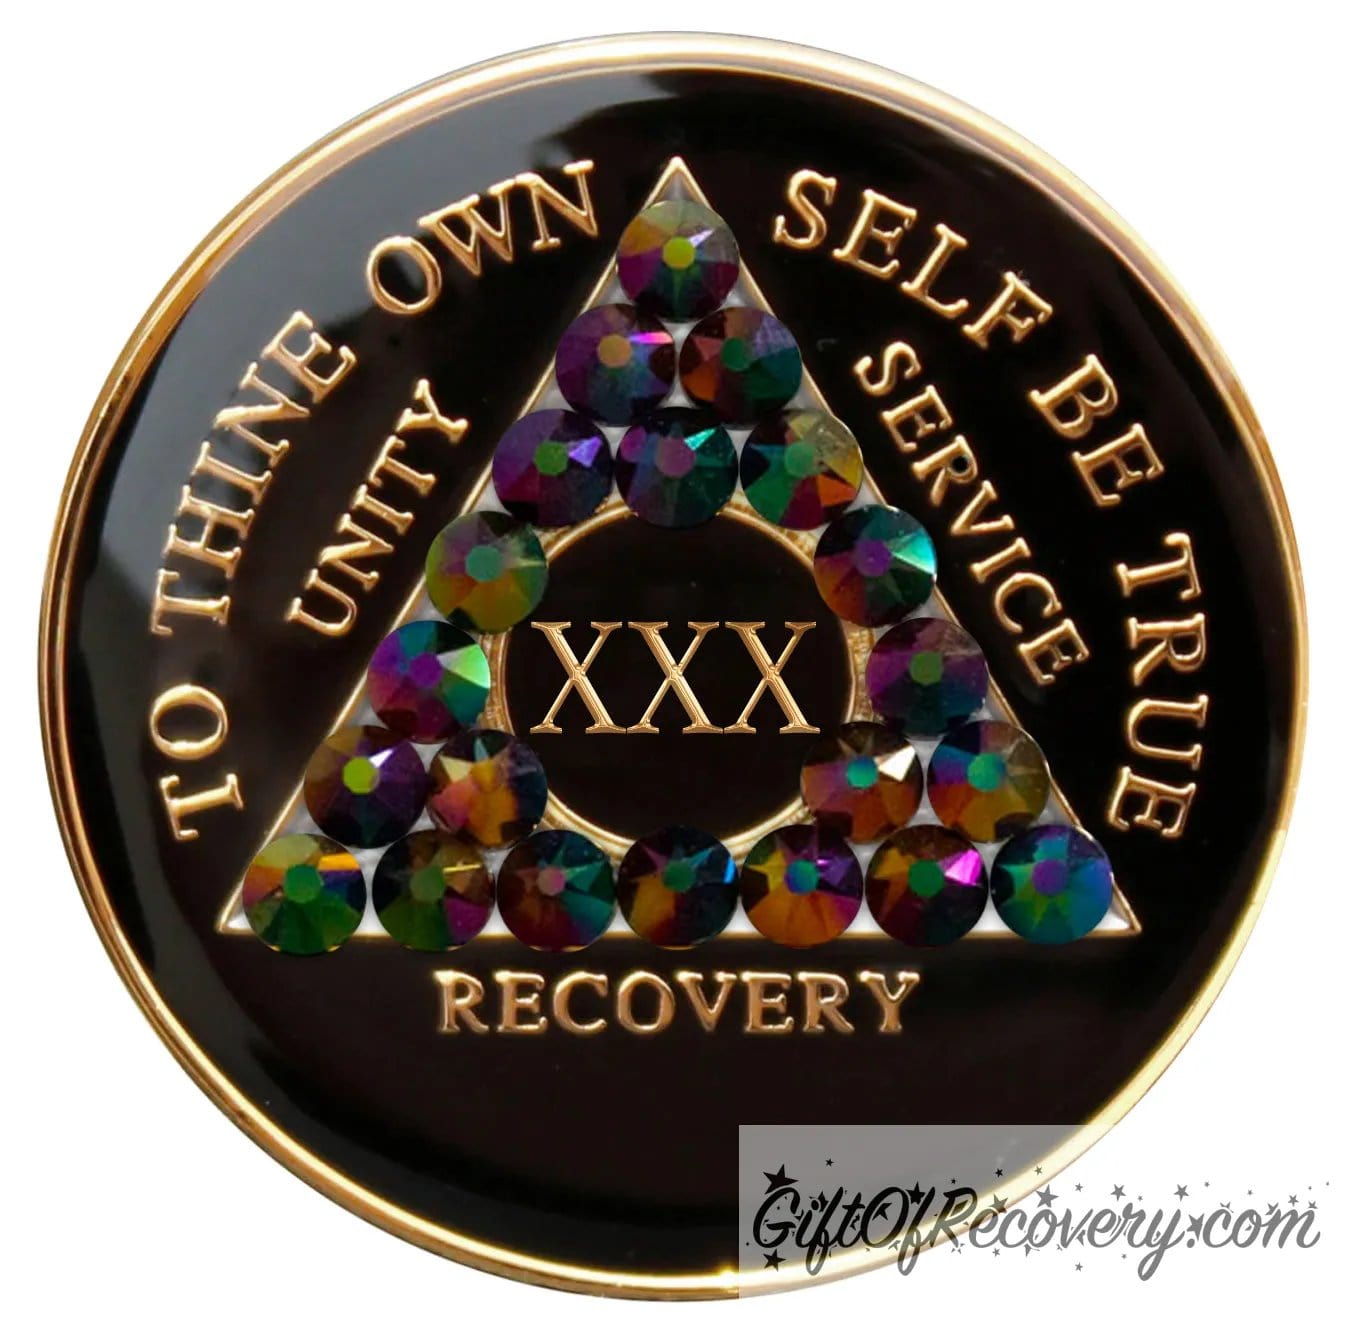 30 year black onyx AA recovery medallion, with 21 genuine peacock crystals, symbolizing the beauty and diversity of recovery journeys, the AA medallion has; to thine own self be true, unity, service, recovery, roman numeral, and the rim, embossed with 14k gold and sealed with resin for a glossy finish.